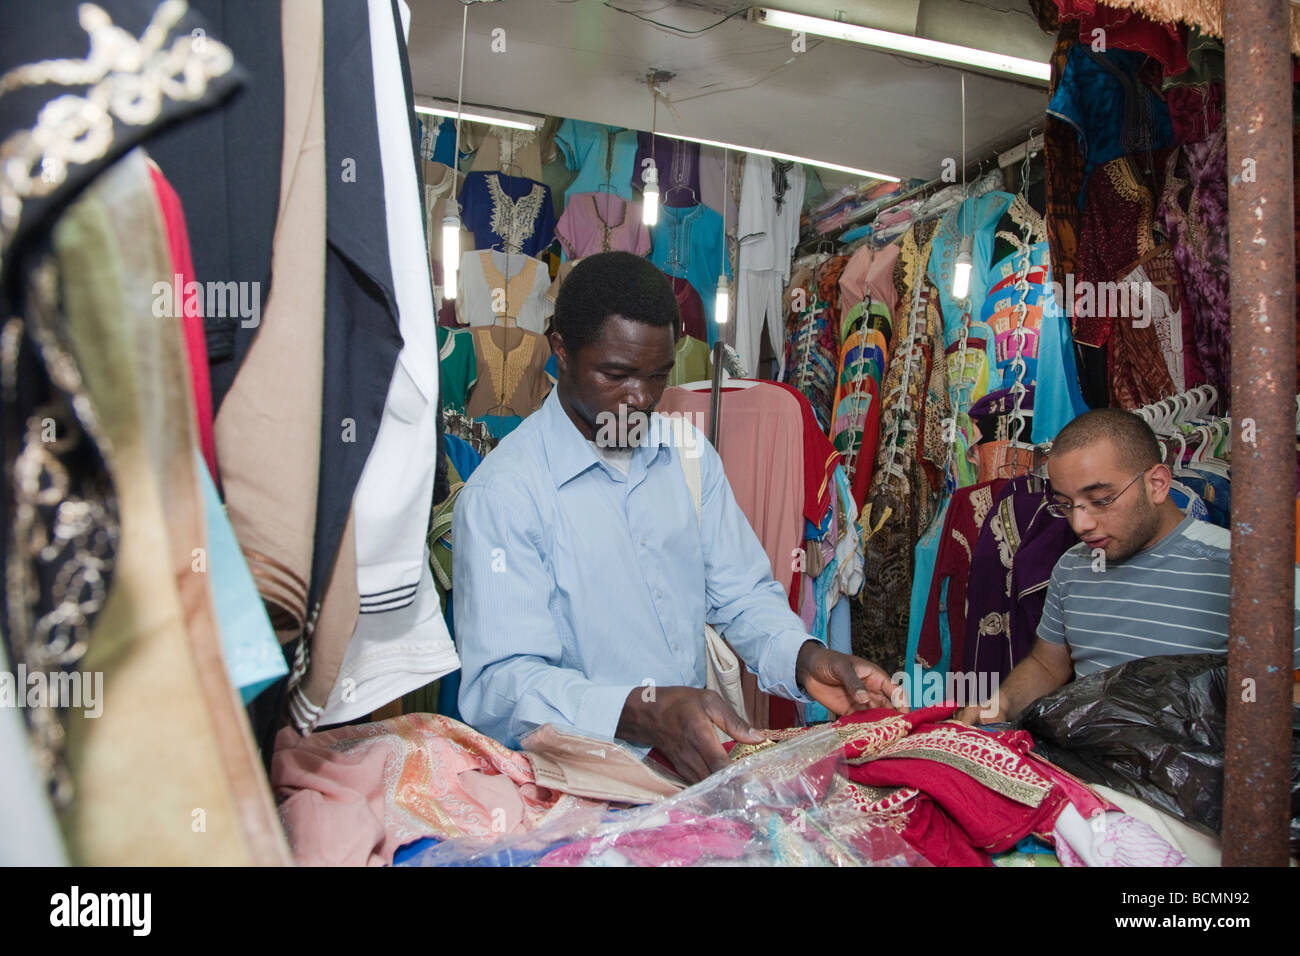 A shopkeeper shows traditional Tunisian clothing to a tourist from the United States in the Medina (old city) in Tunis. Stock Photo